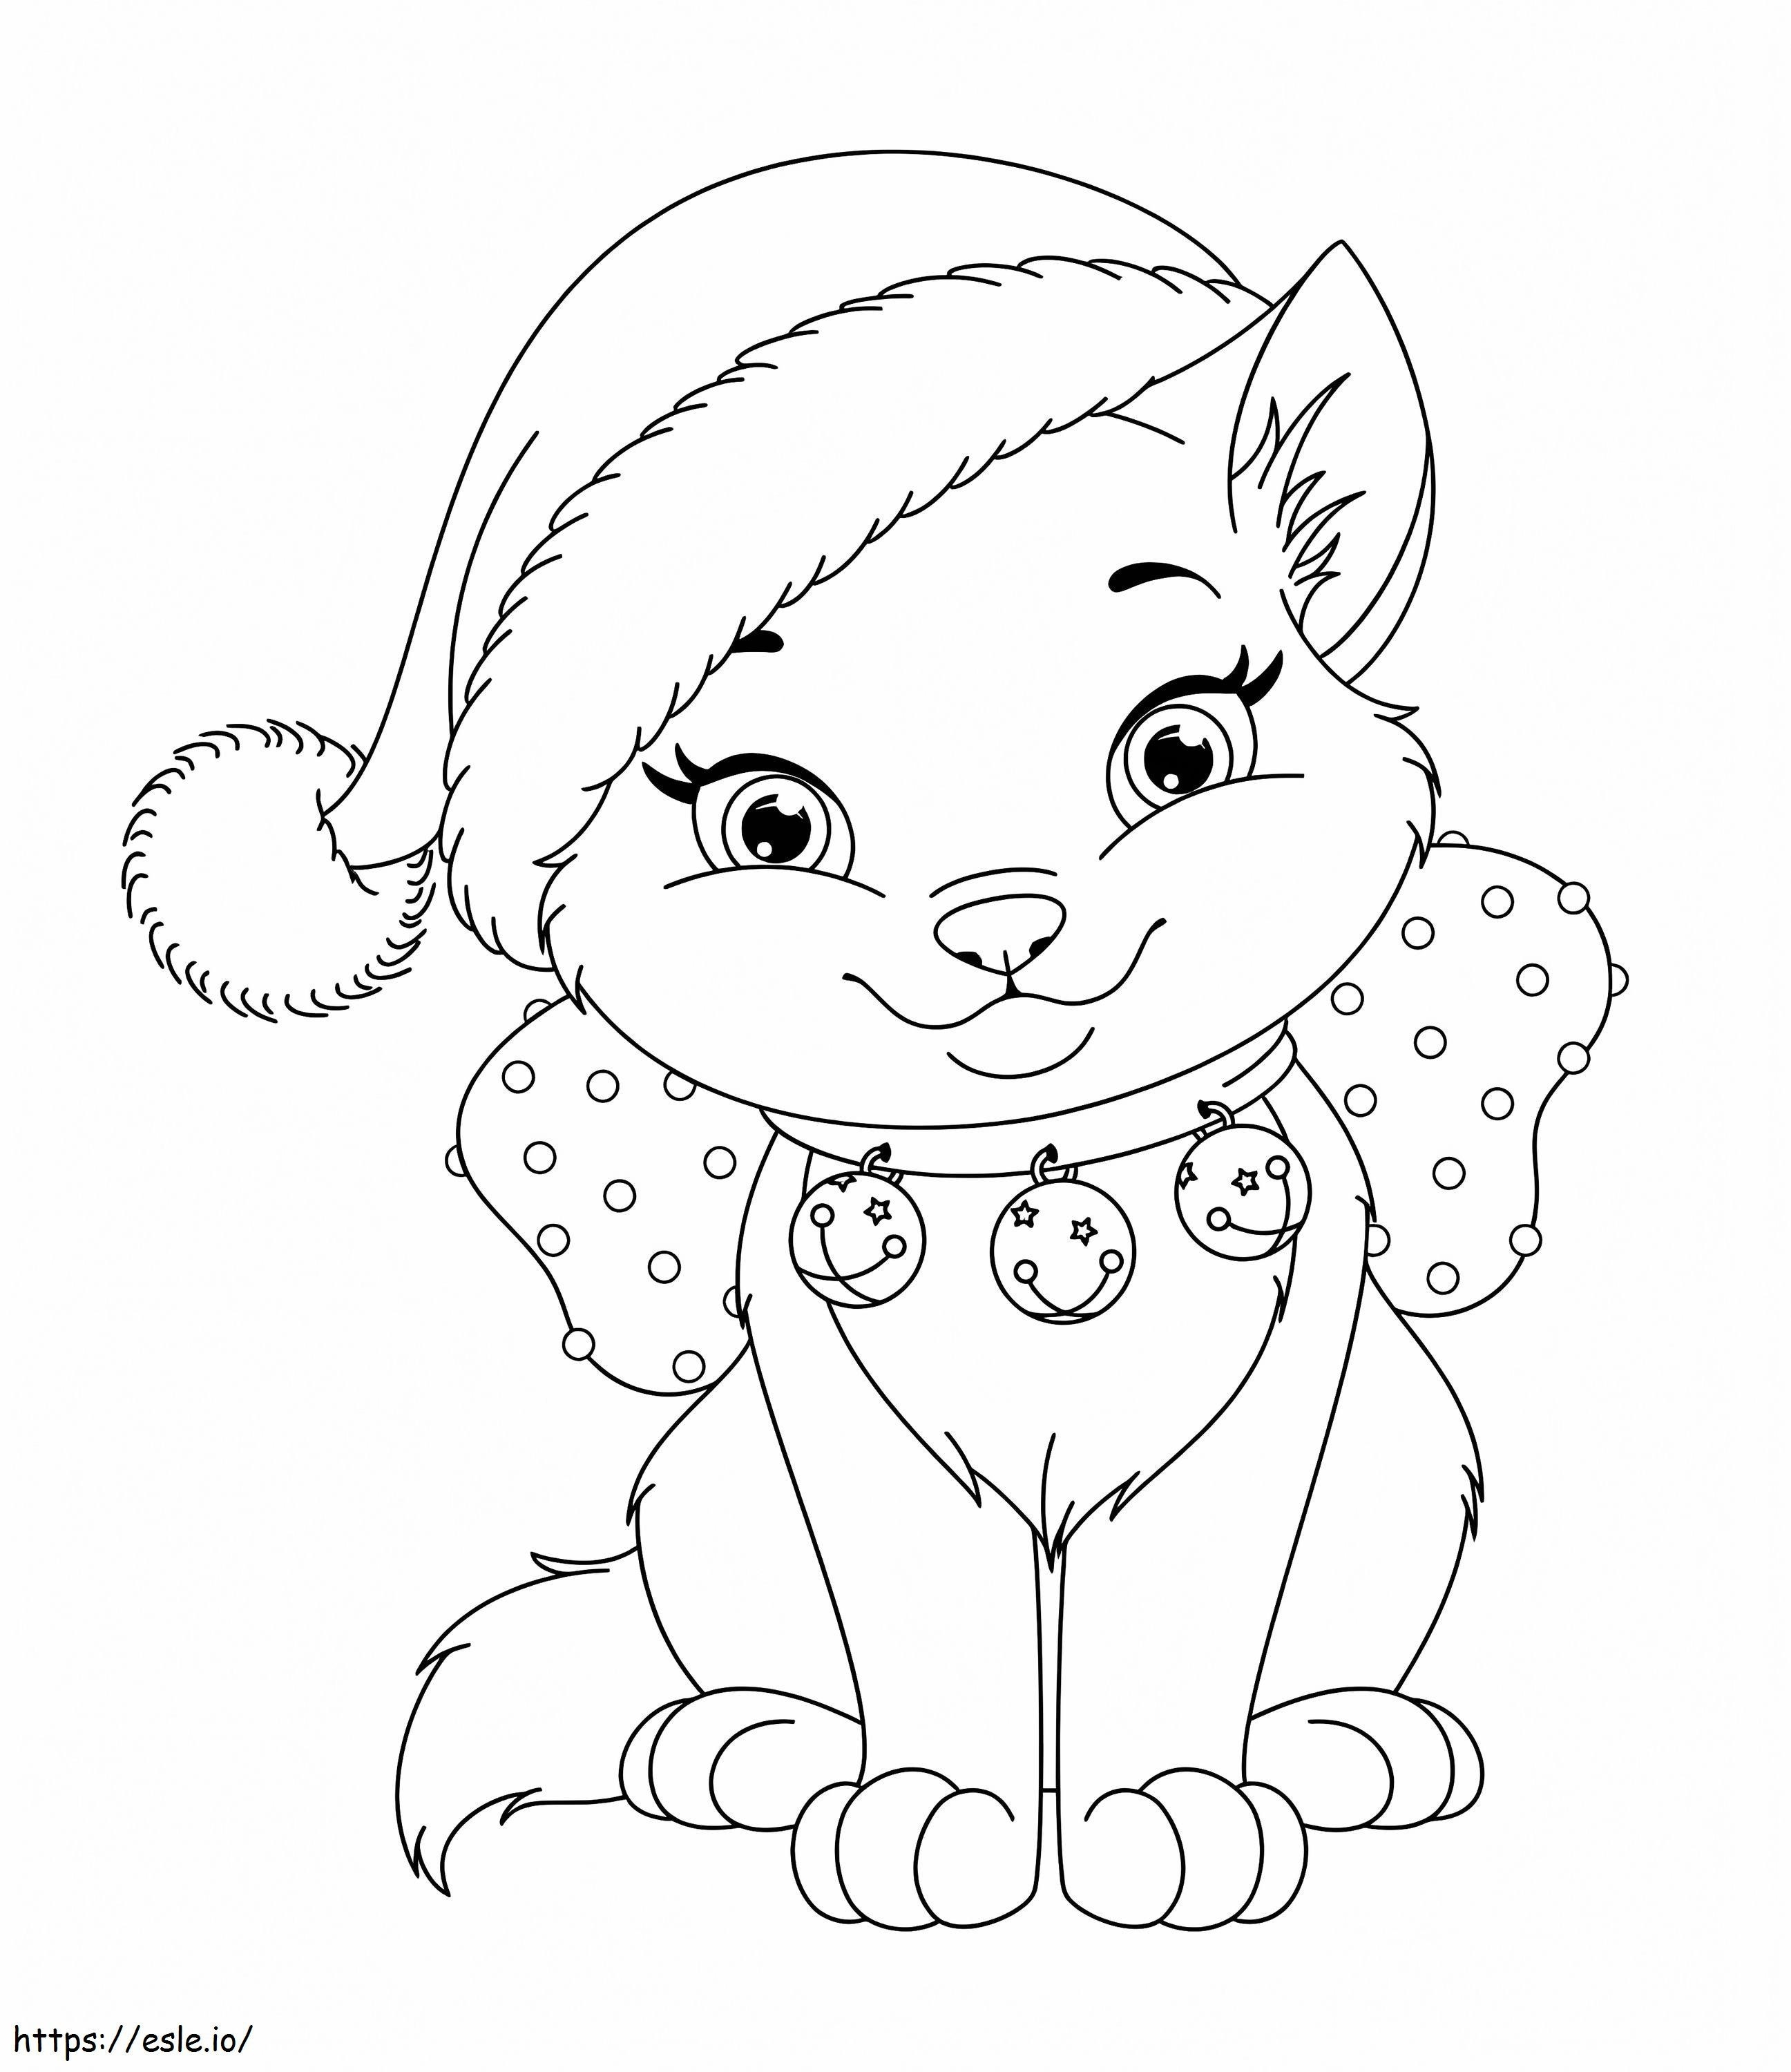 Cute Christmas Kitten coloring page